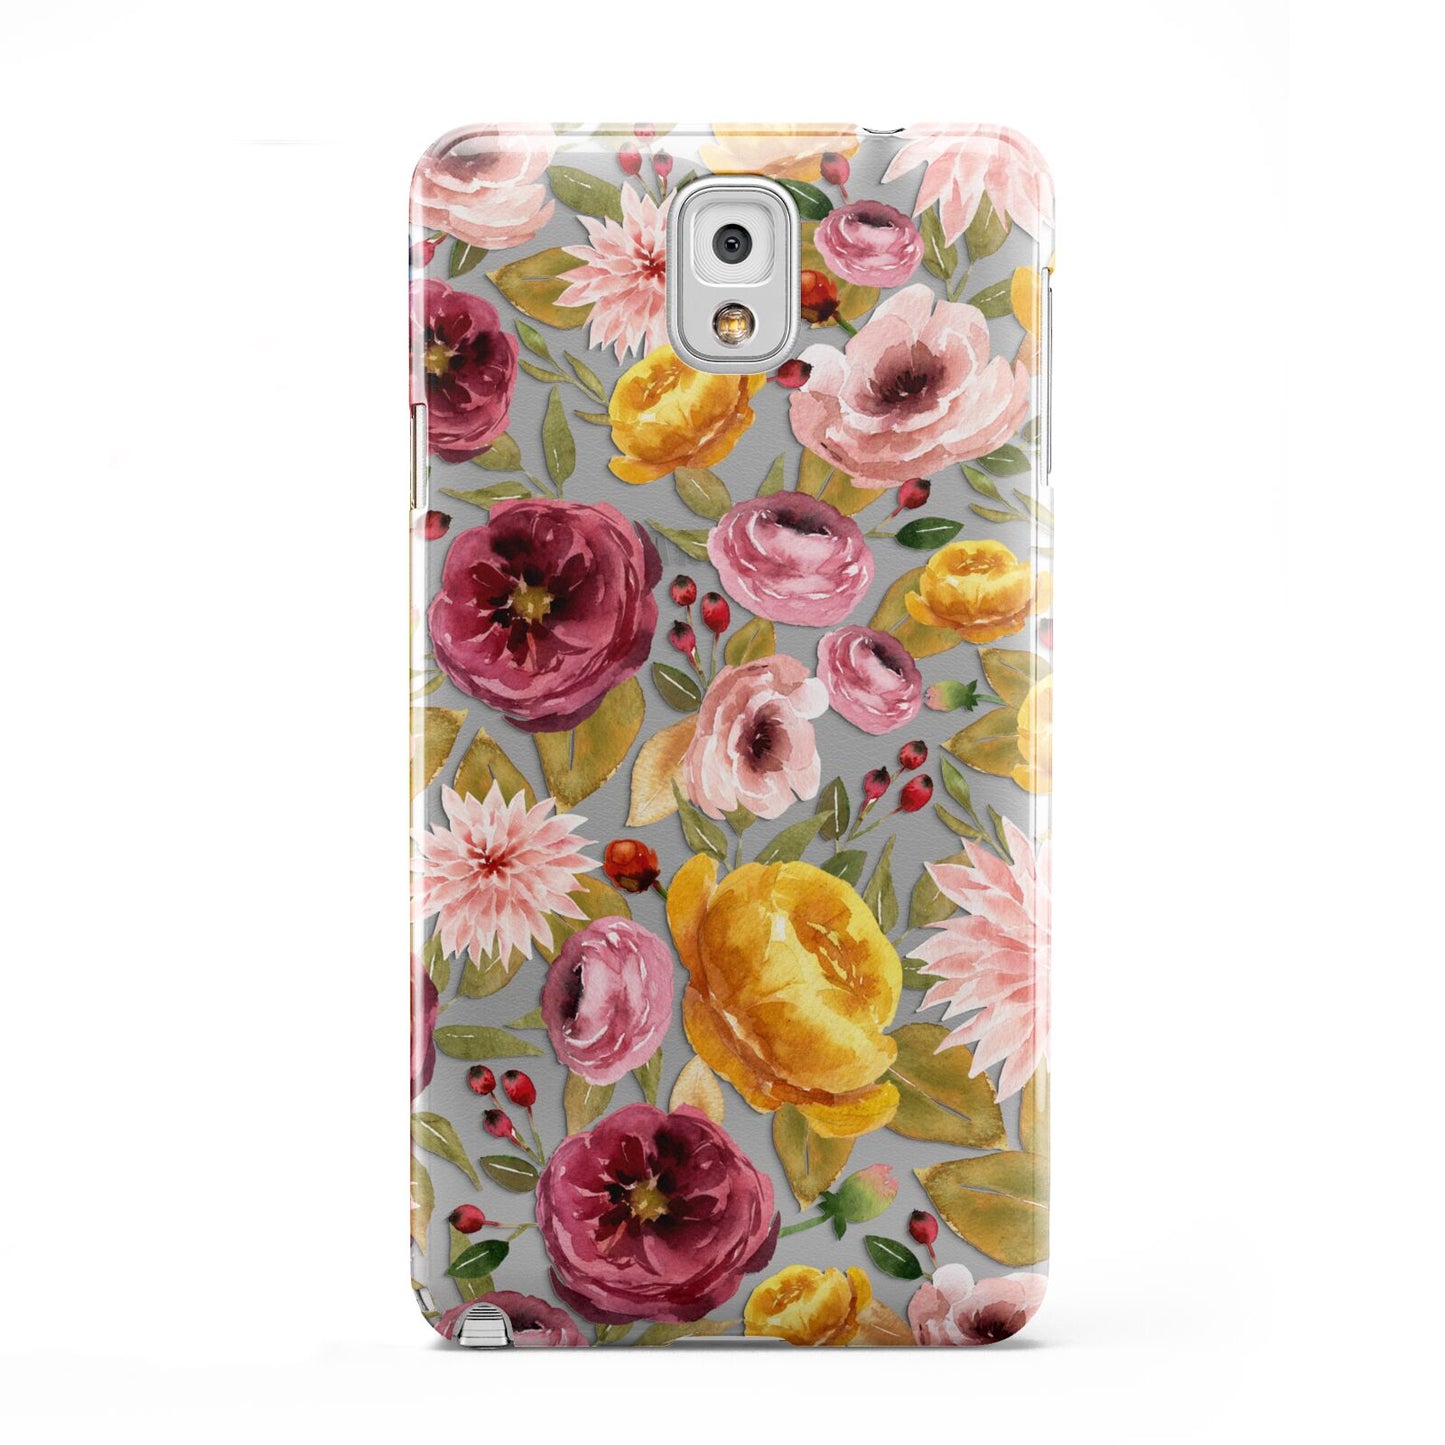 Pink and Mustard Floral Samsung Galaxy Note 3 Case